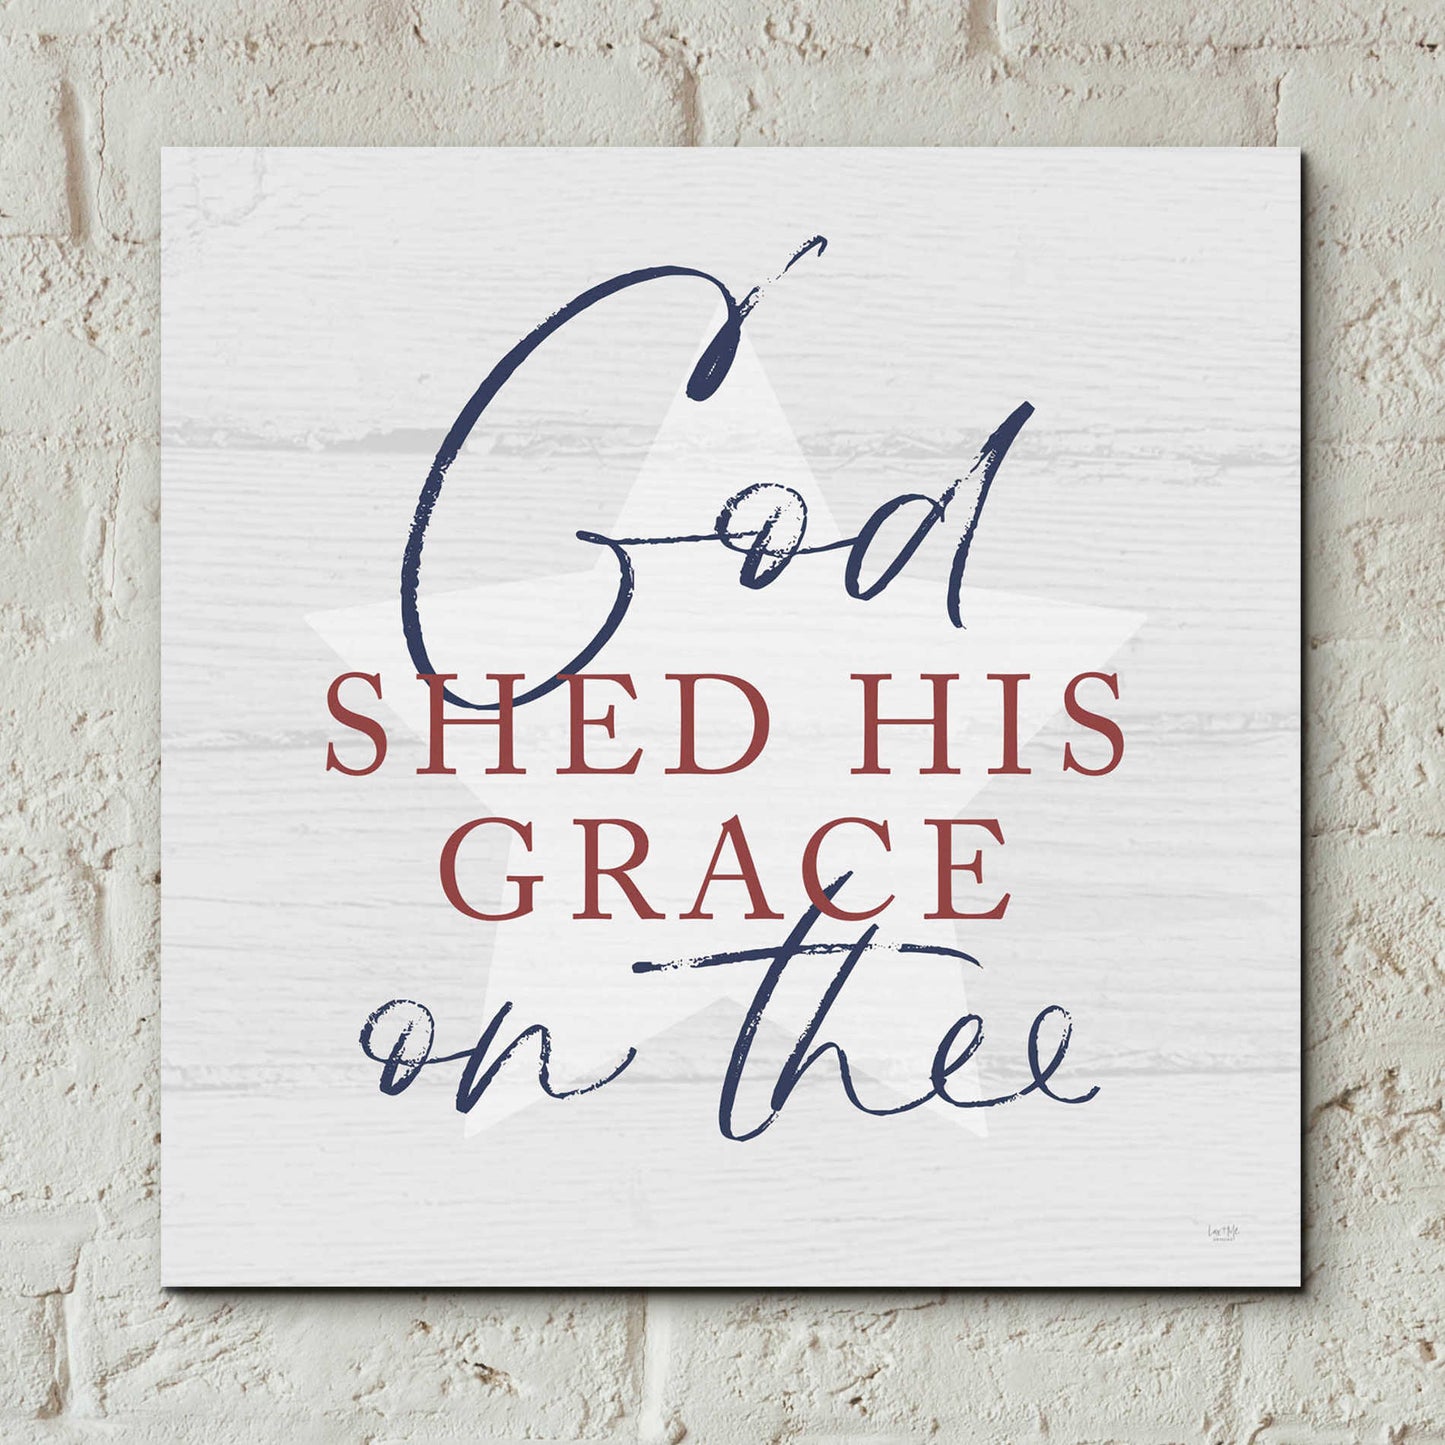 Epic Art 'God Shed His Grace' by Lux + Me, Acrylic Glass Wall Art,12x12